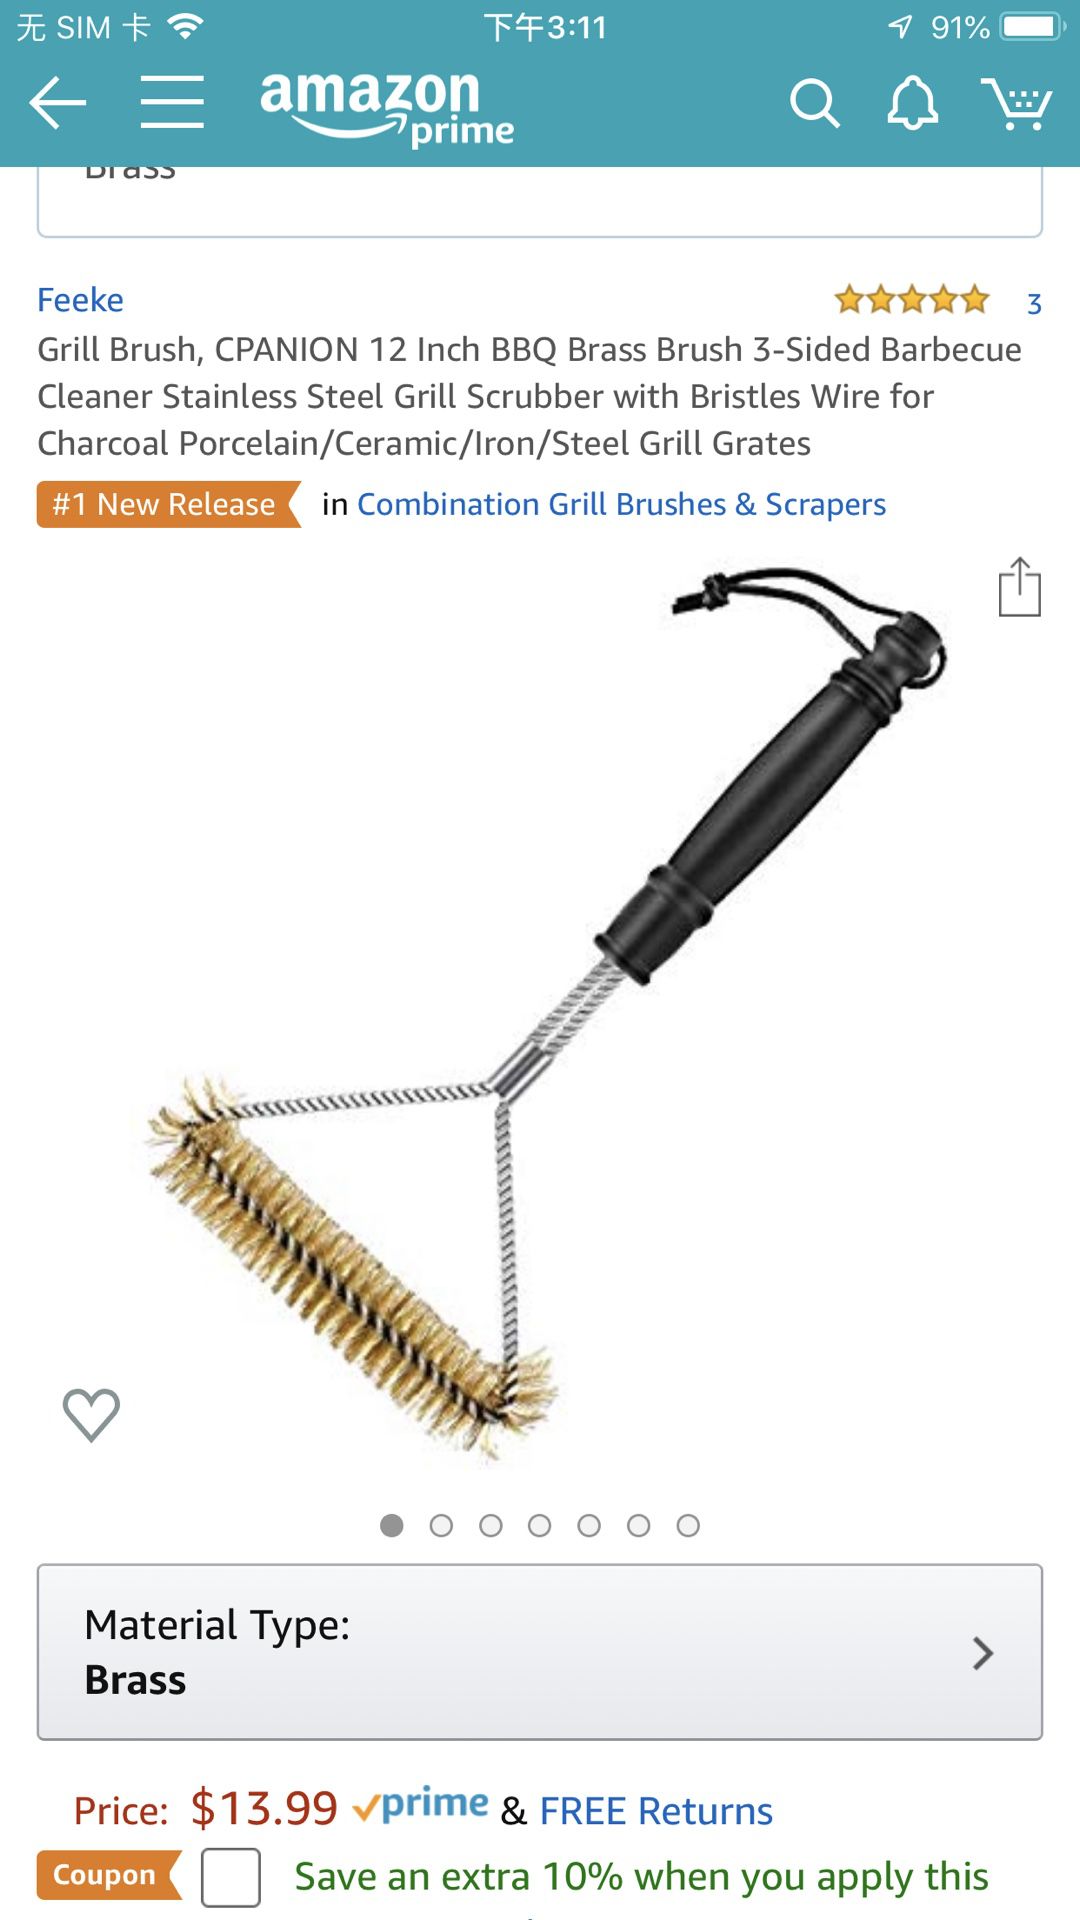 Brand new Grill Brush, CPANION 12 Inch BBQ Brass Brush 3-Sided Barbecue Cleaner Stainless Steel Grill Scrubber